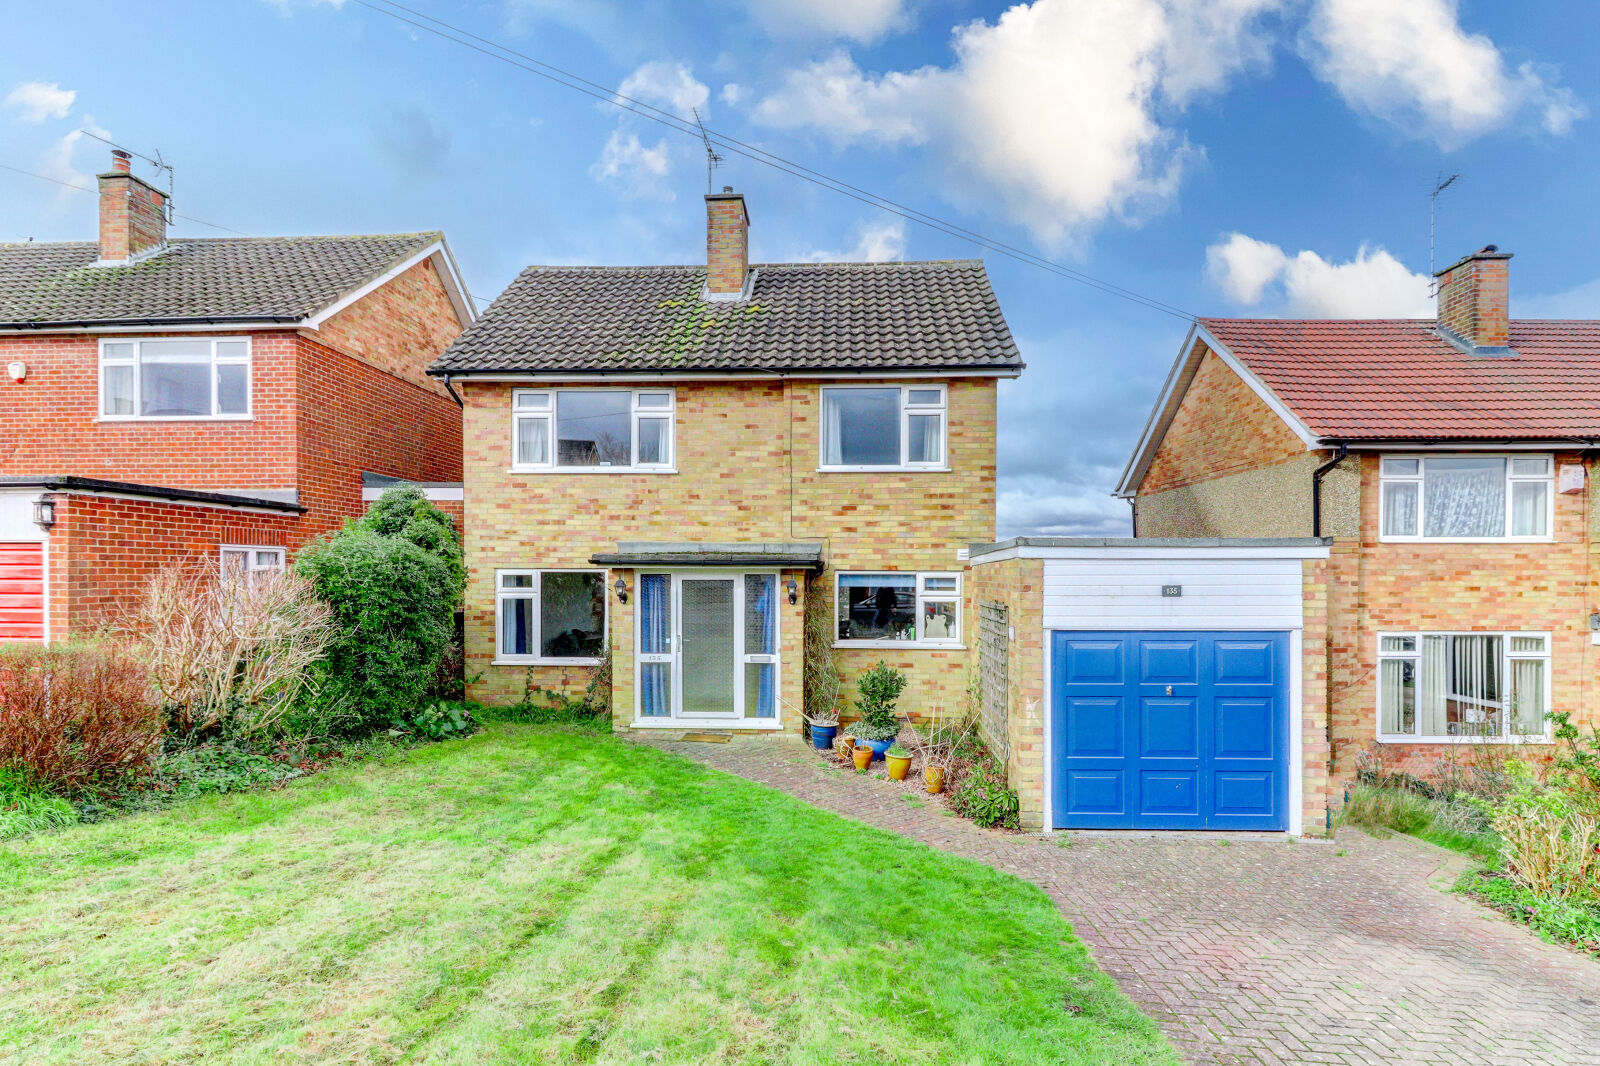 3 bedroom detached house for sale Carver Hill Road, High Wycombe, HP11, main image